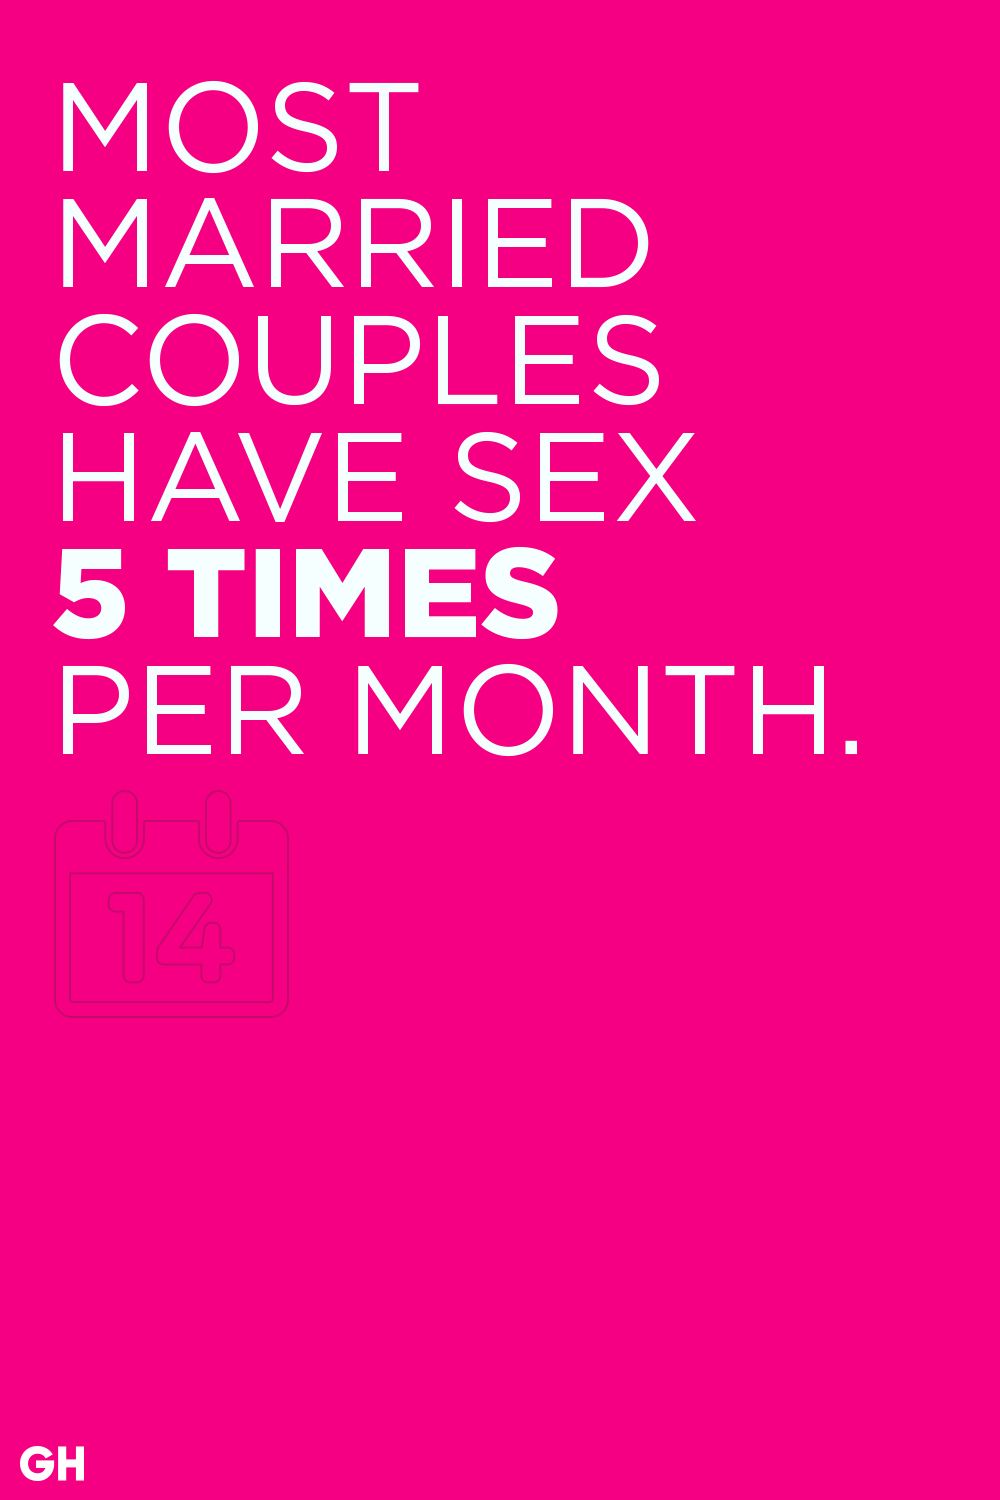 sexual studies of married couples